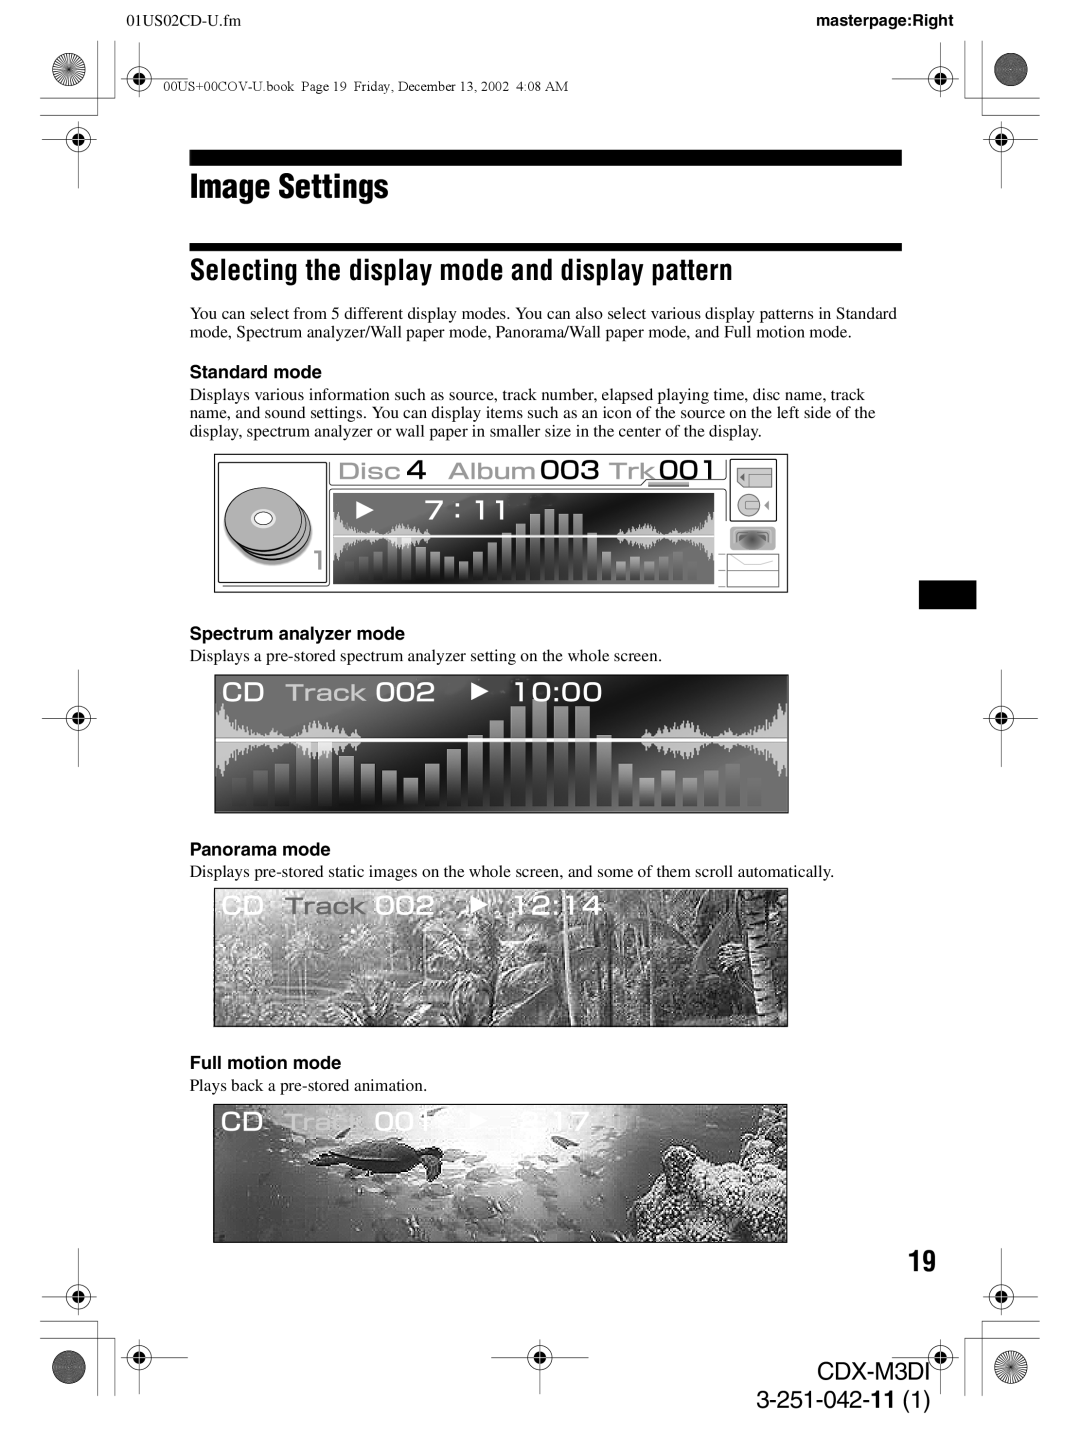 Sony CDX-M3DI Image Settings, Selecting the display mode and display pattern, 3-251-042-11, 01US02CD-U.fm 